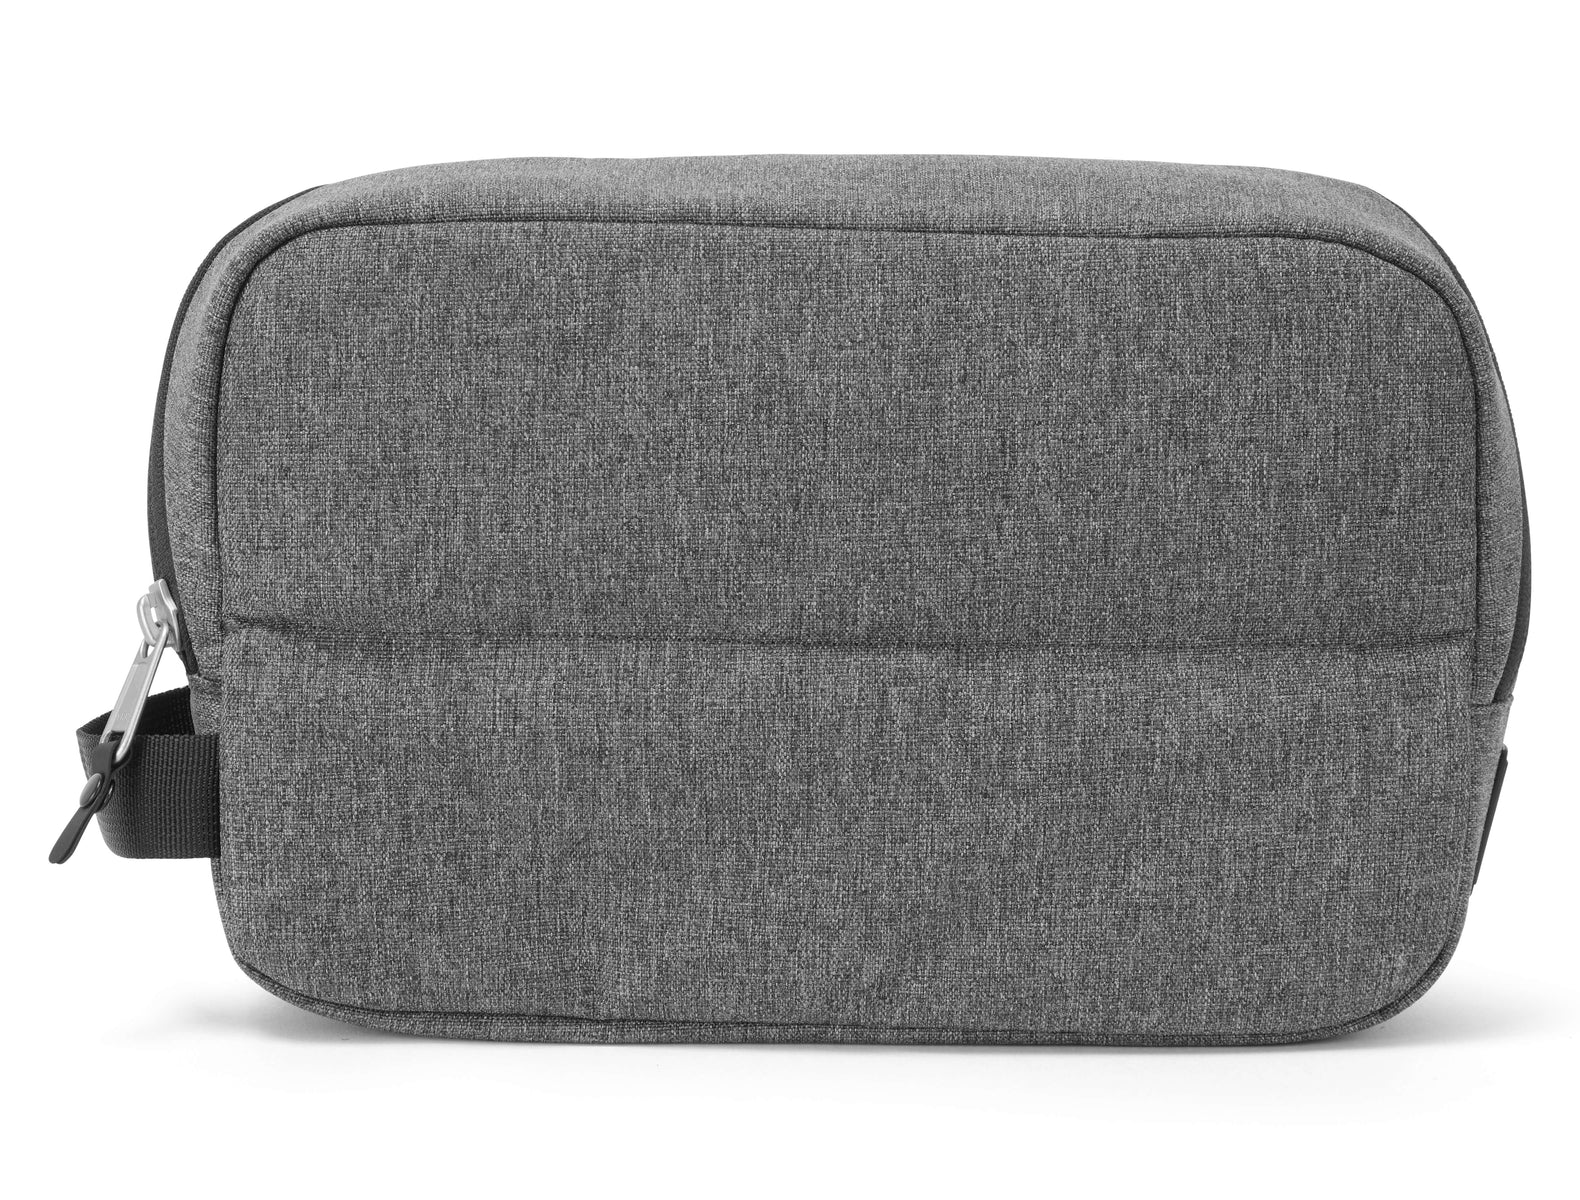 Utility Pouch for Hybrid Working Tech Accessories